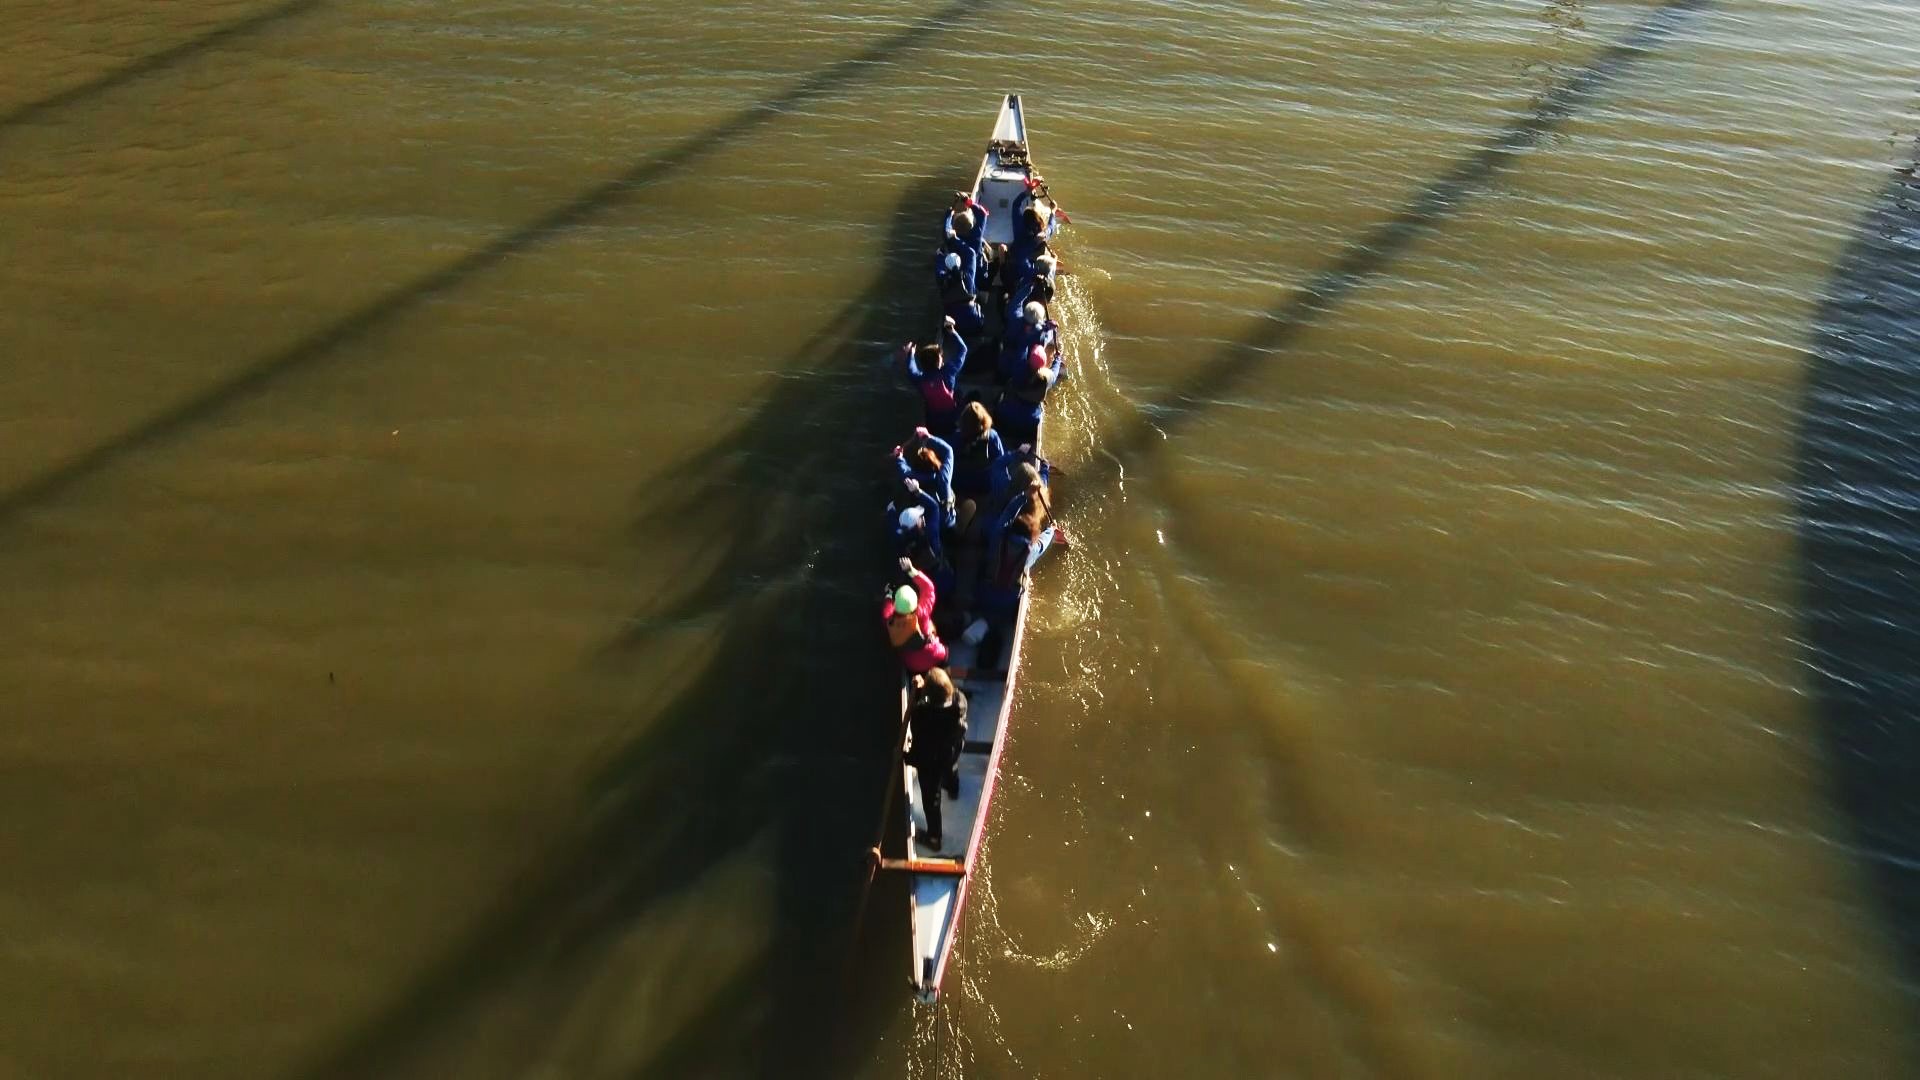 The dragon boat team is made up of breast cancer patients and survivors. After a year of being apart, they are cherishing every moment together.